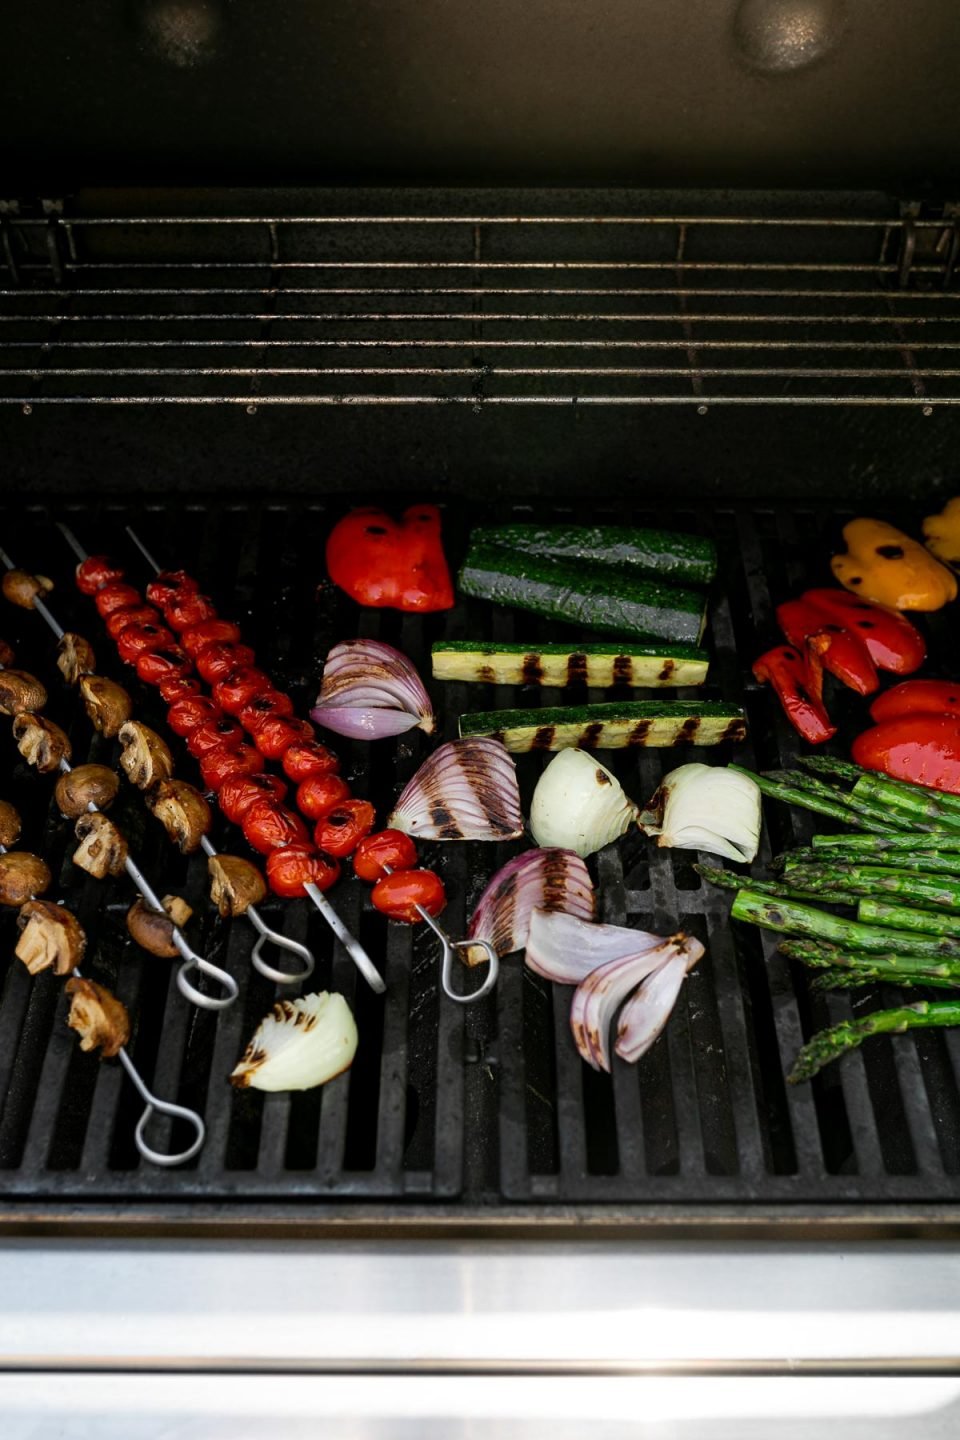 A straight on shot of a variety of grilled veggies including grilled asparagus, grilled zucchini, grilled onion, grilled bell peppers, grilled cherry tomatoes on skewers, & grilled mushrooms on skewers ​are being grilled on gas grill grates. Many of the veggies have grill marks on them after being flipped to the other side